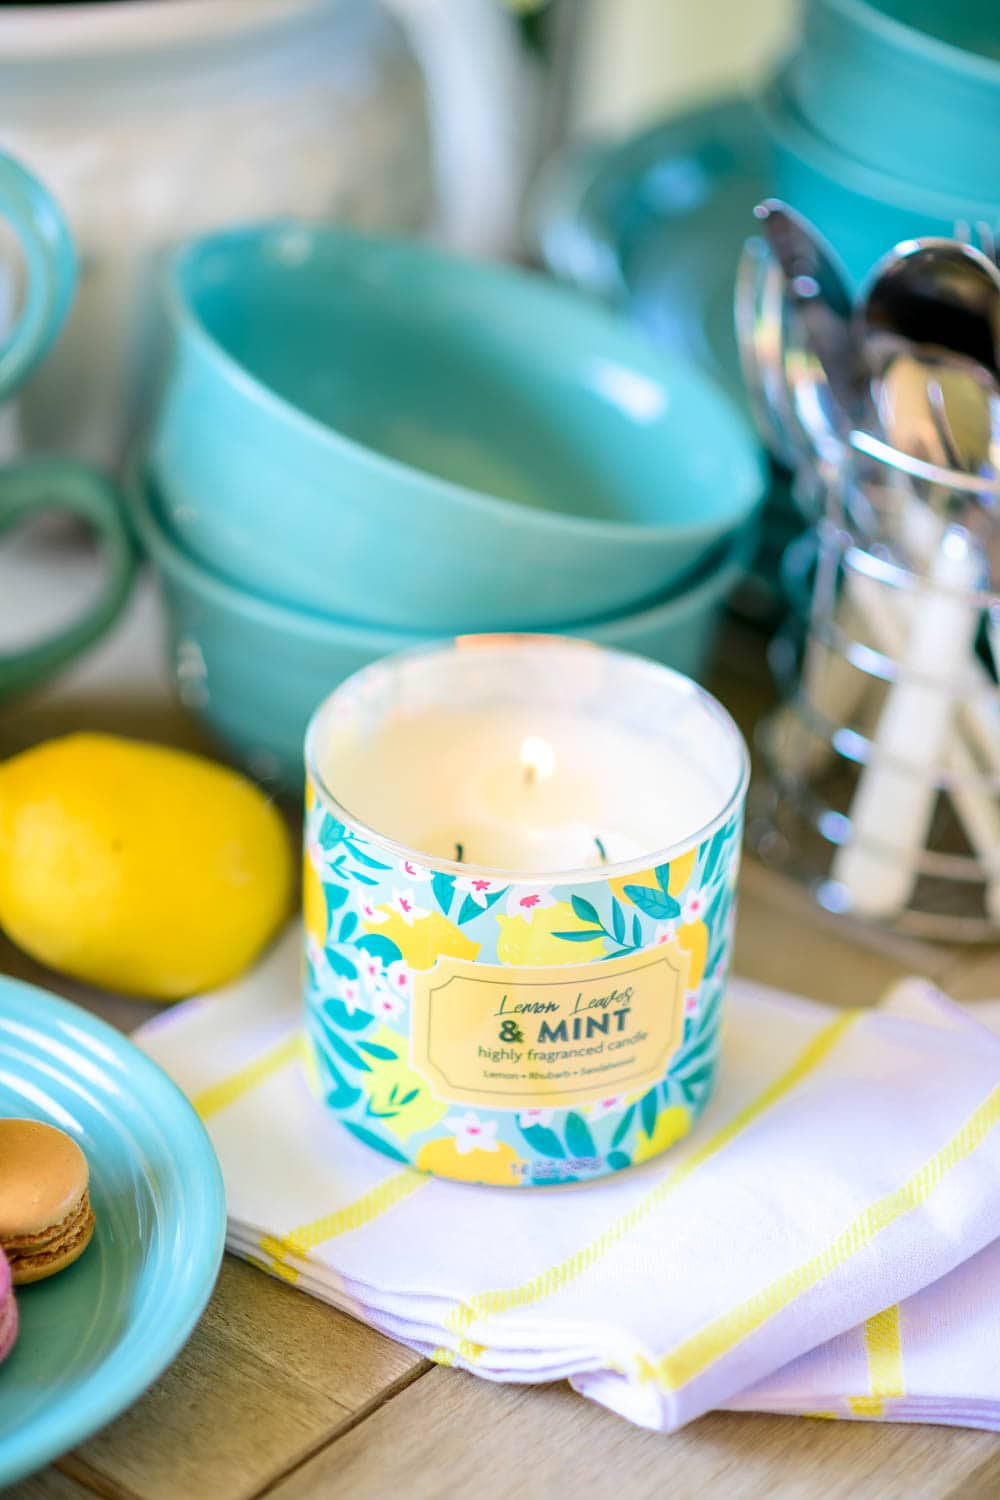 Love the turquoise color of this dish set mixed with lemon accents for summer. #ABlissfulNest #WalmartHome #ad